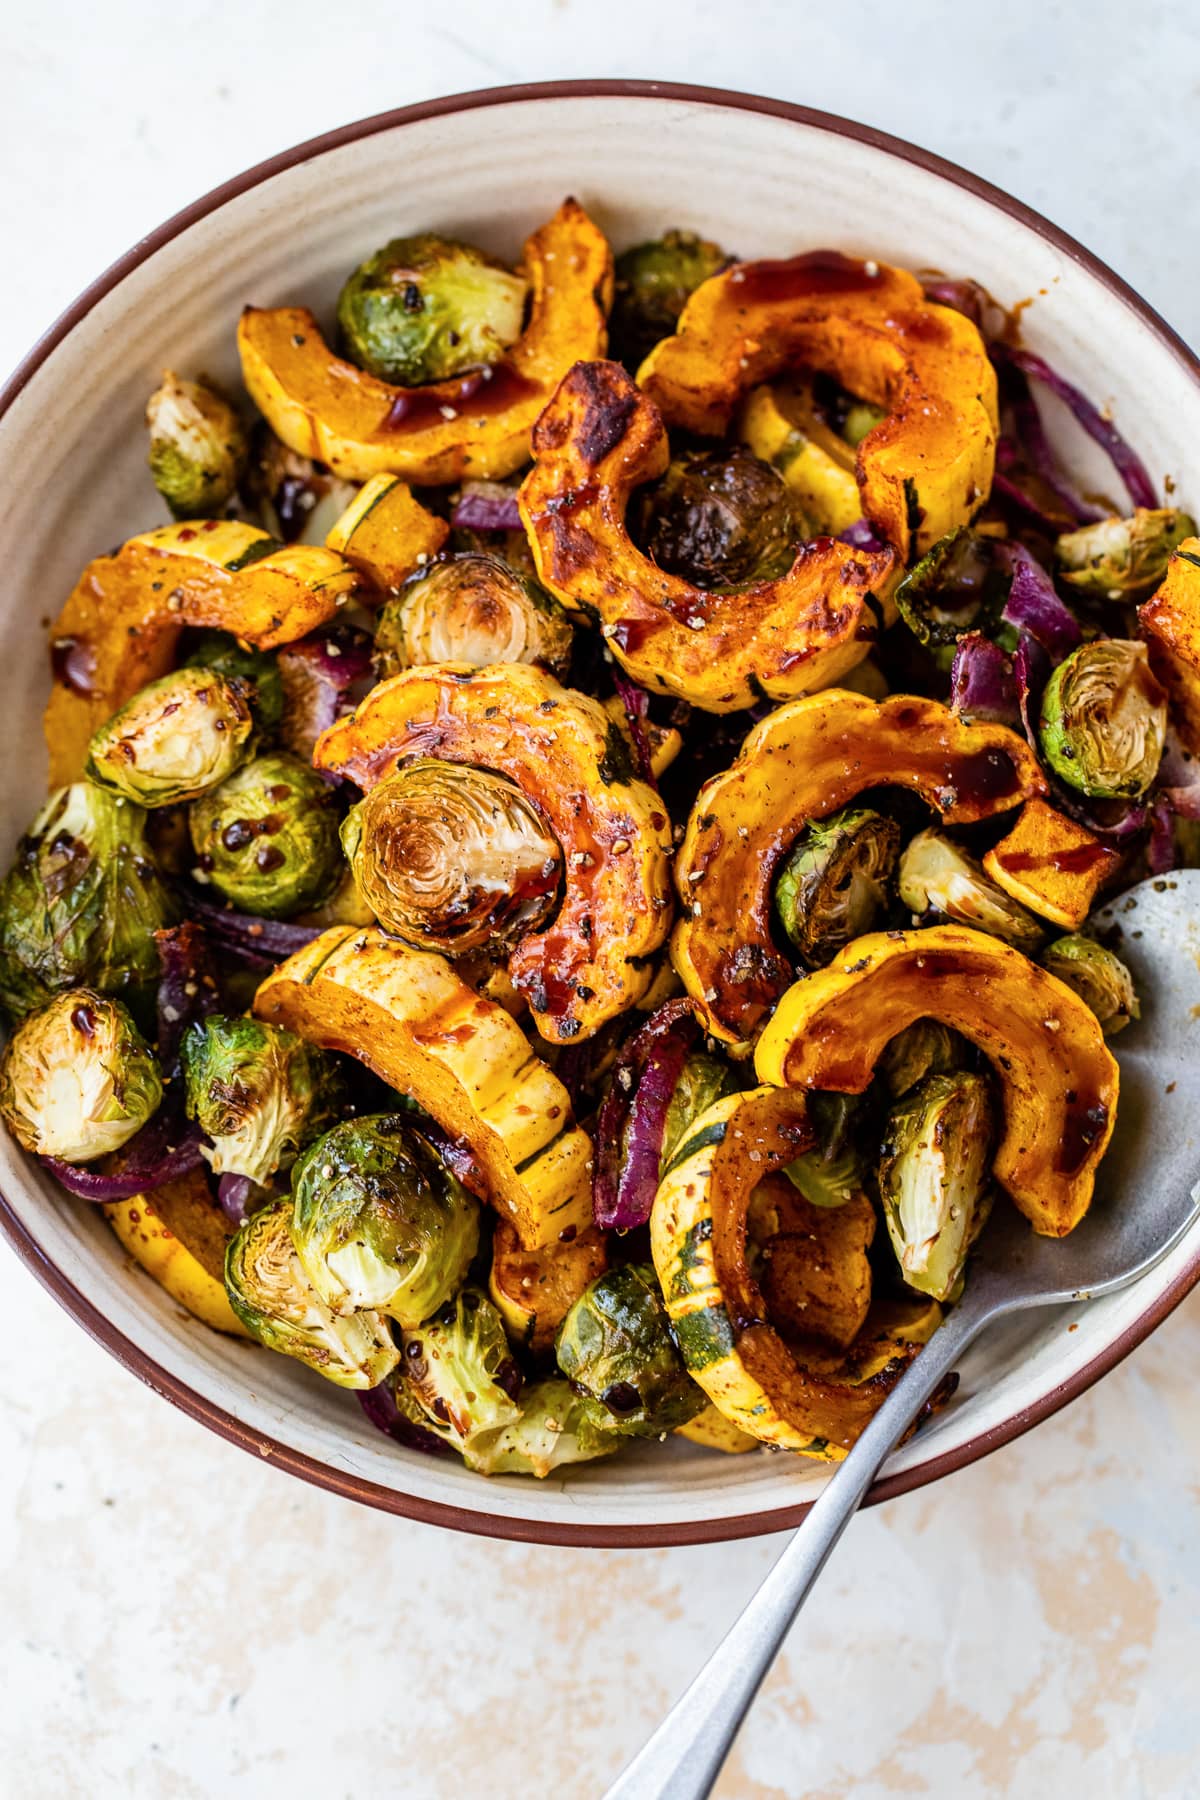 Roasted Delicata Squash and Brussels Sprouts with Balsamic Glaze